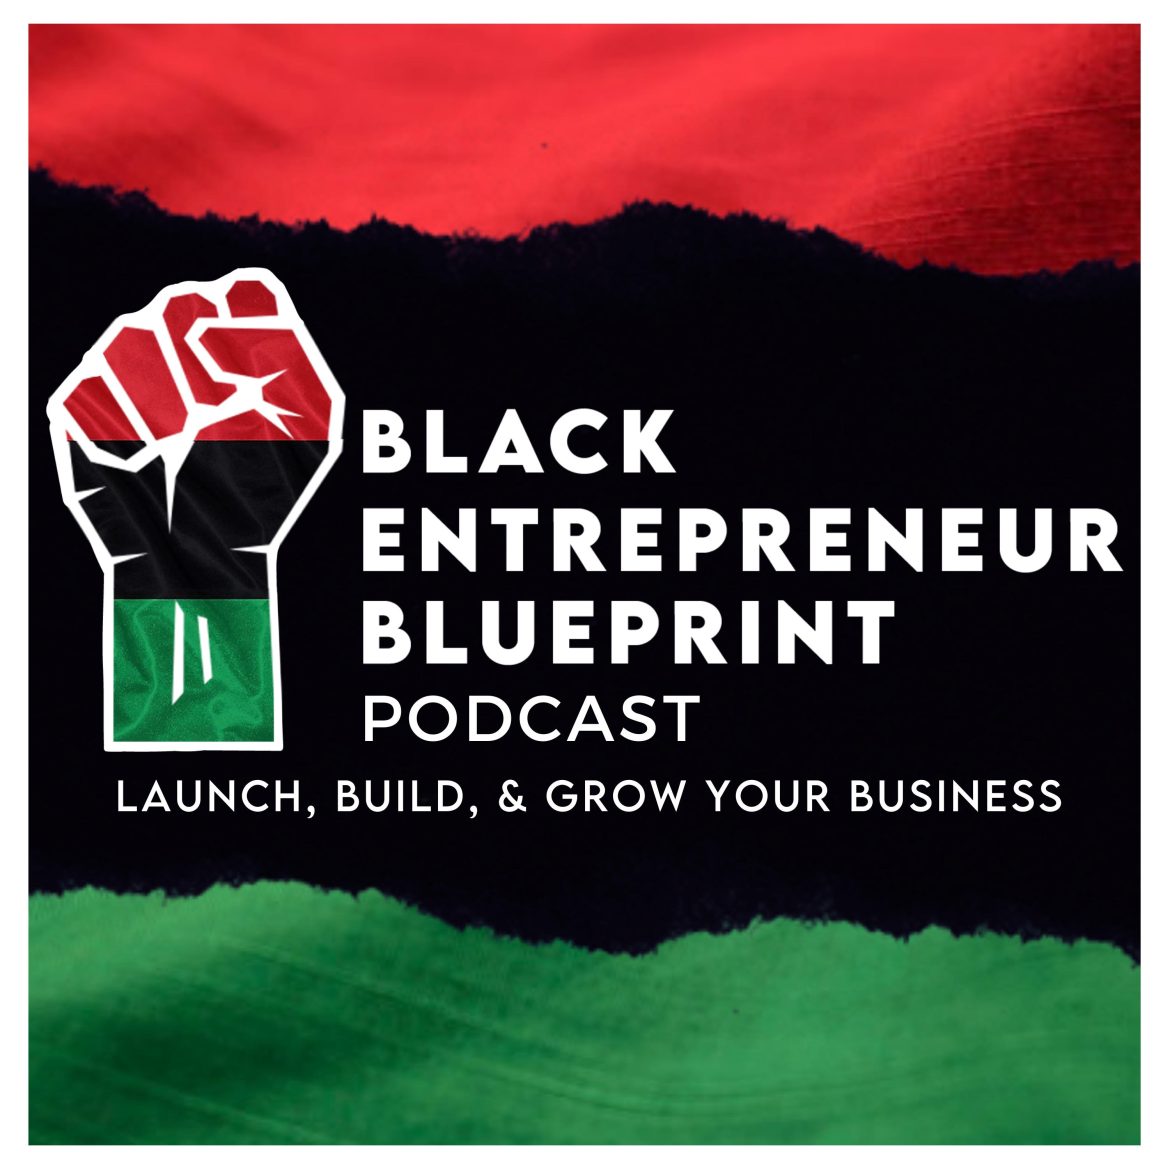 Black Podcasting - Black Entrepreneur Blueprint 527 - Jay Jones - The Three Missing Essential Elements That Will Transform Your Business And Your Life